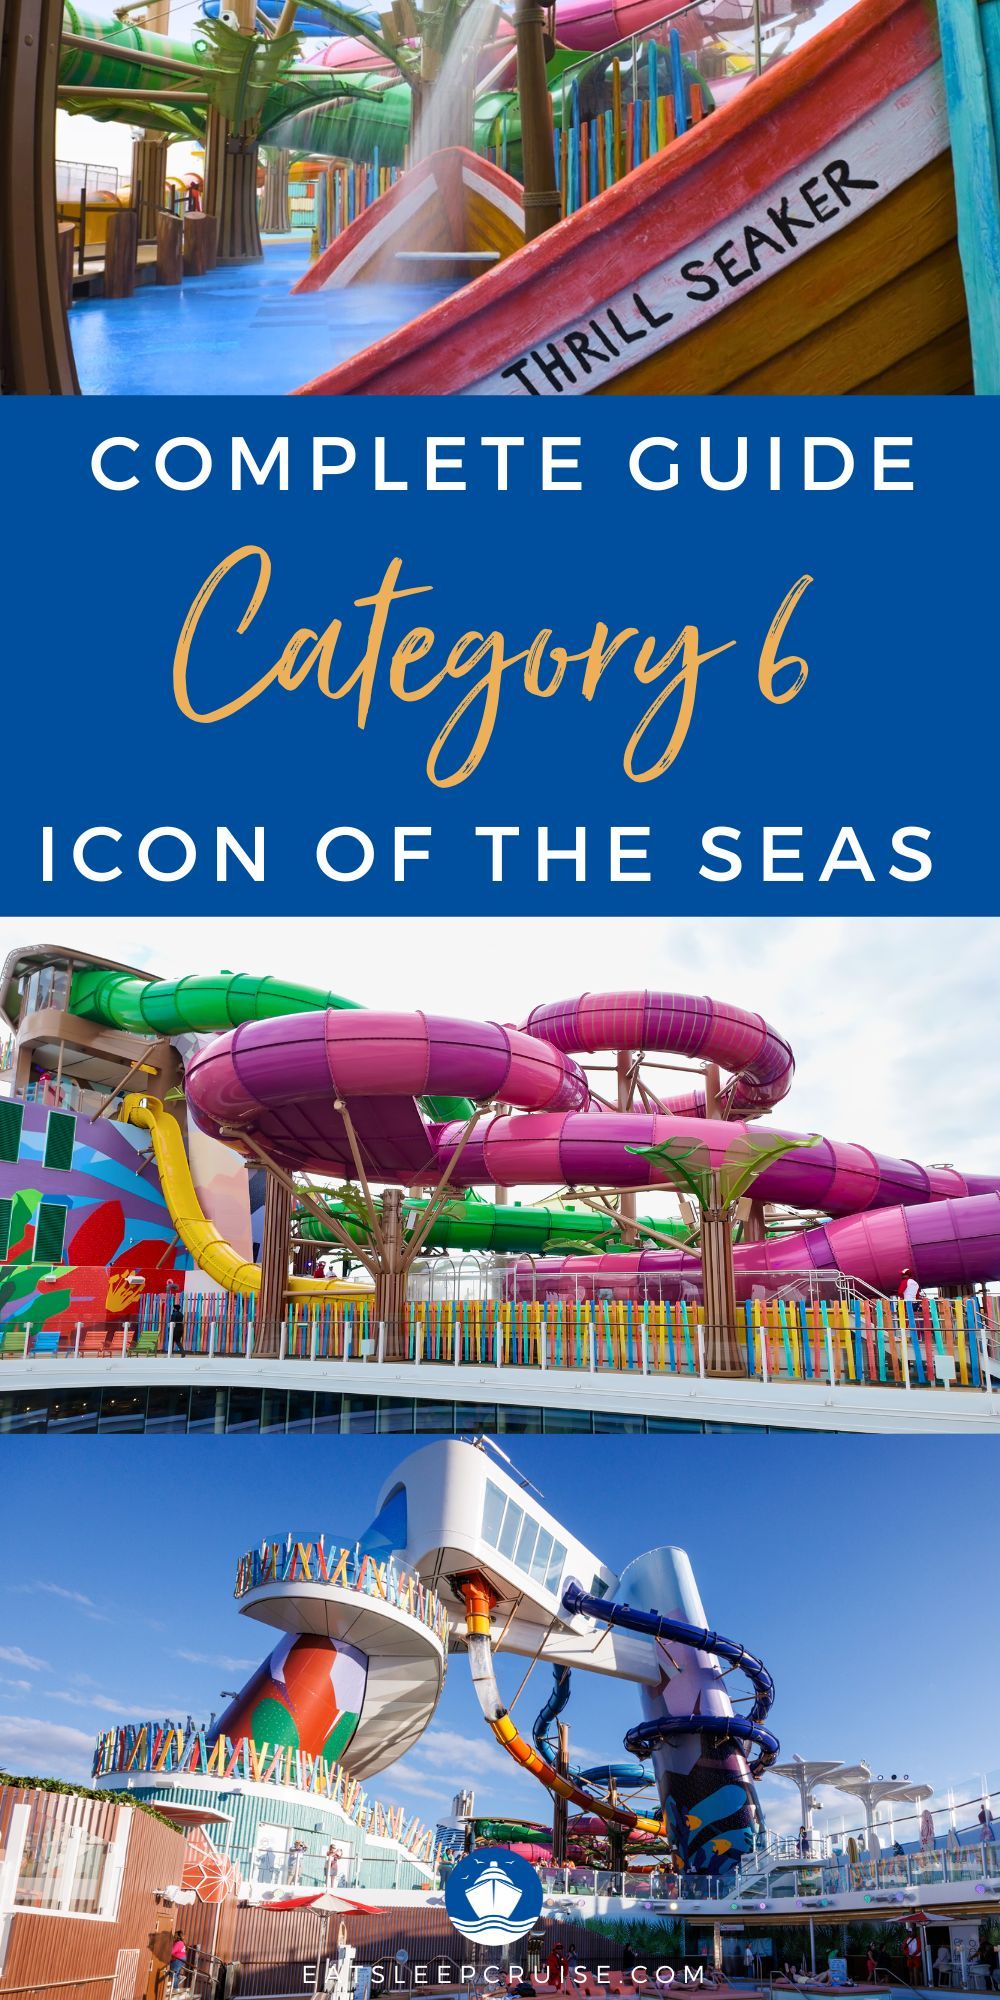 Complete Guide to Category 6 Waterpark on Icon of the Seas